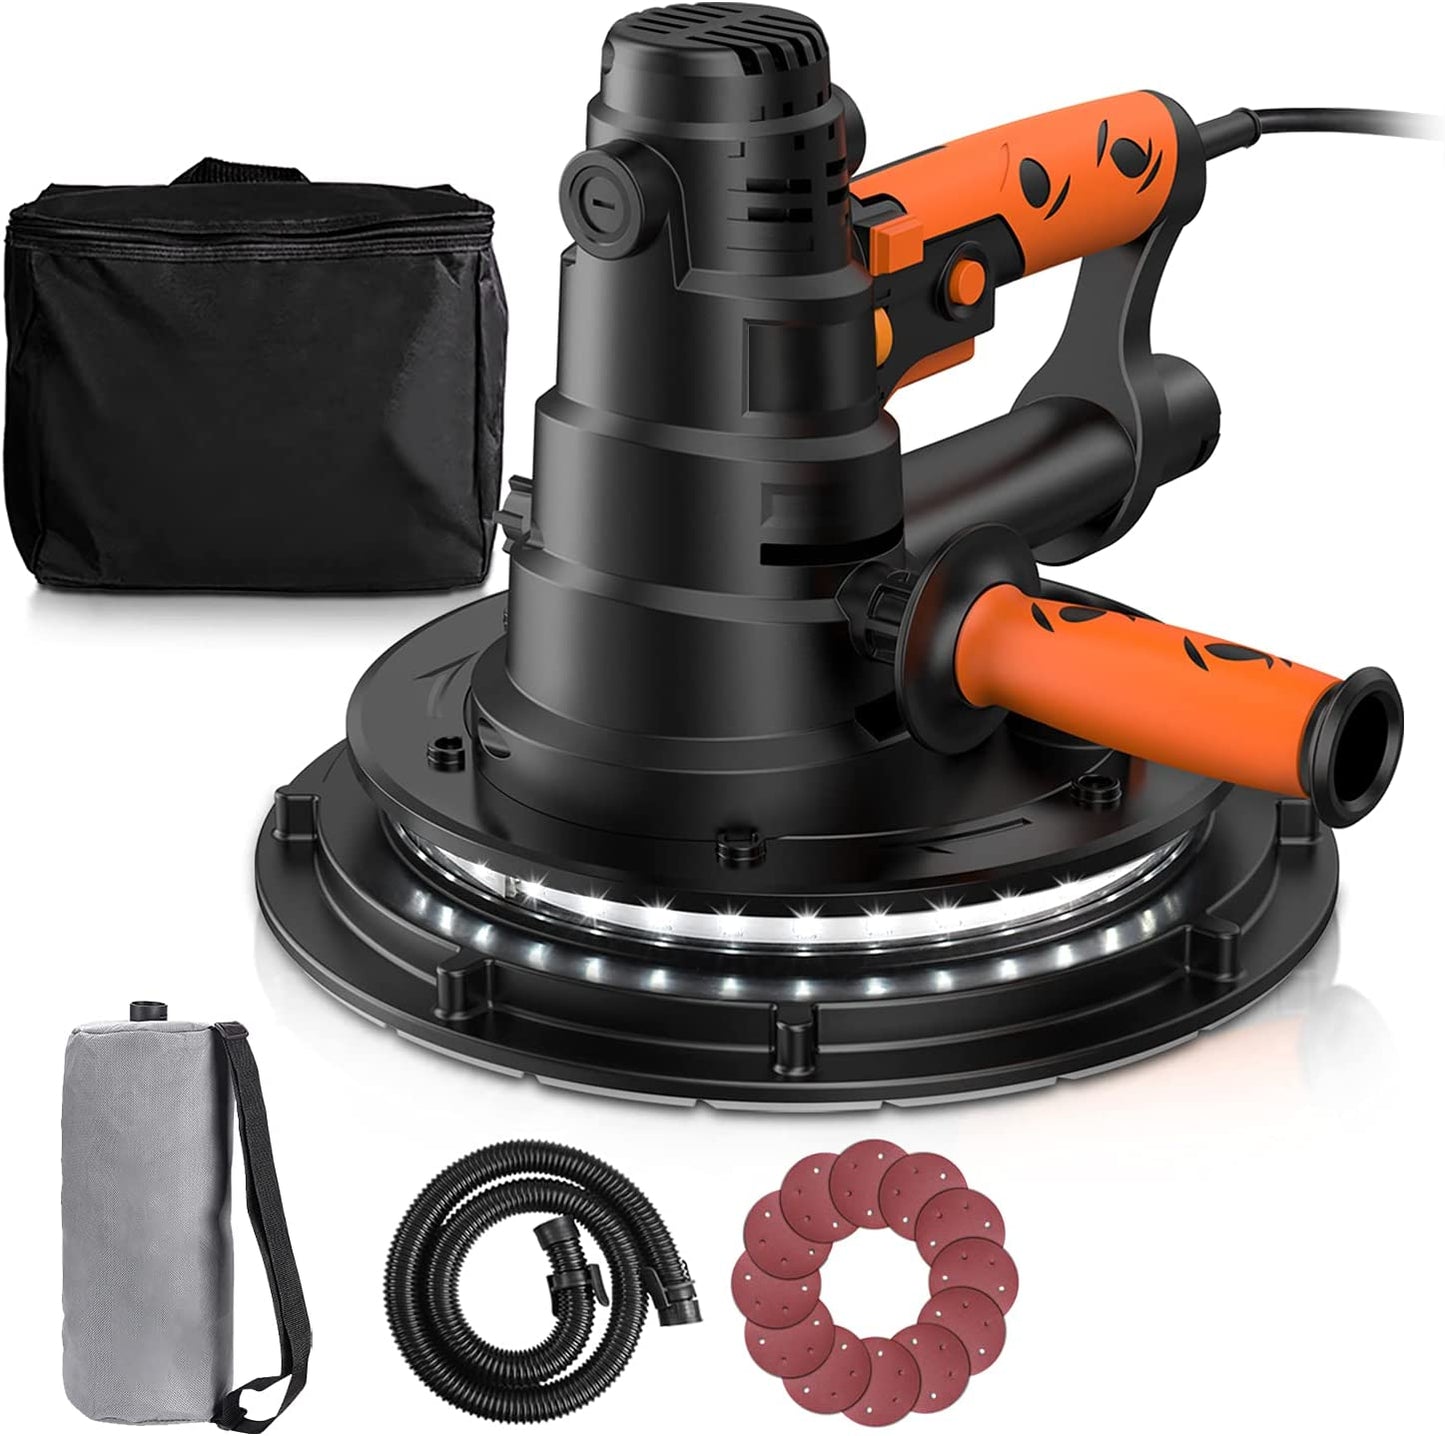 NEW TACKLIFE 800W Electric Drywall Sander Automatic Vacuum Dust Collection Systm